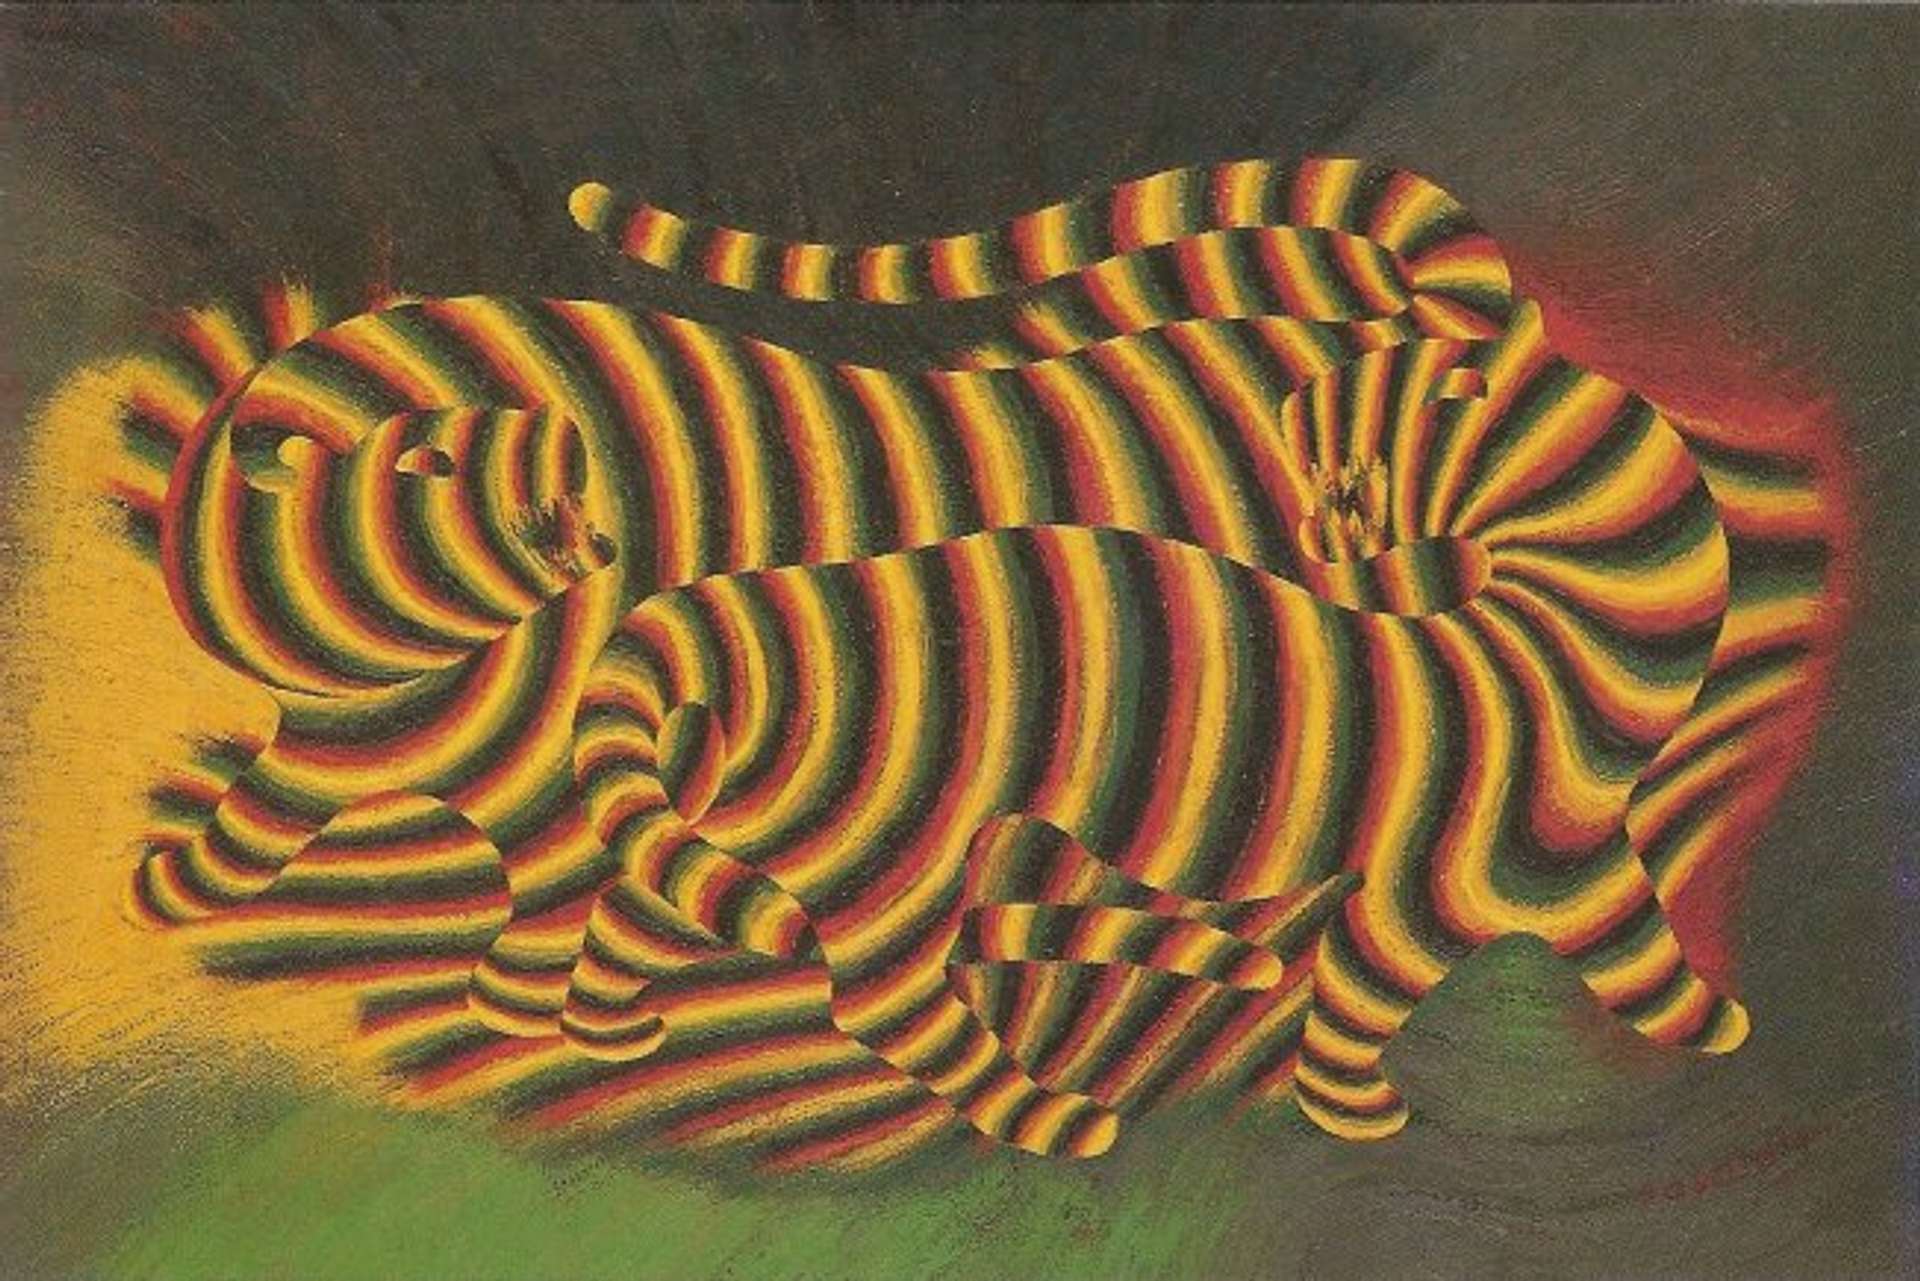 Two abstracted tigers with yellow, green, red, and black repeating stripes whose bodies are interlocked aganist an abstracted background in the same bleeding colour hues. 